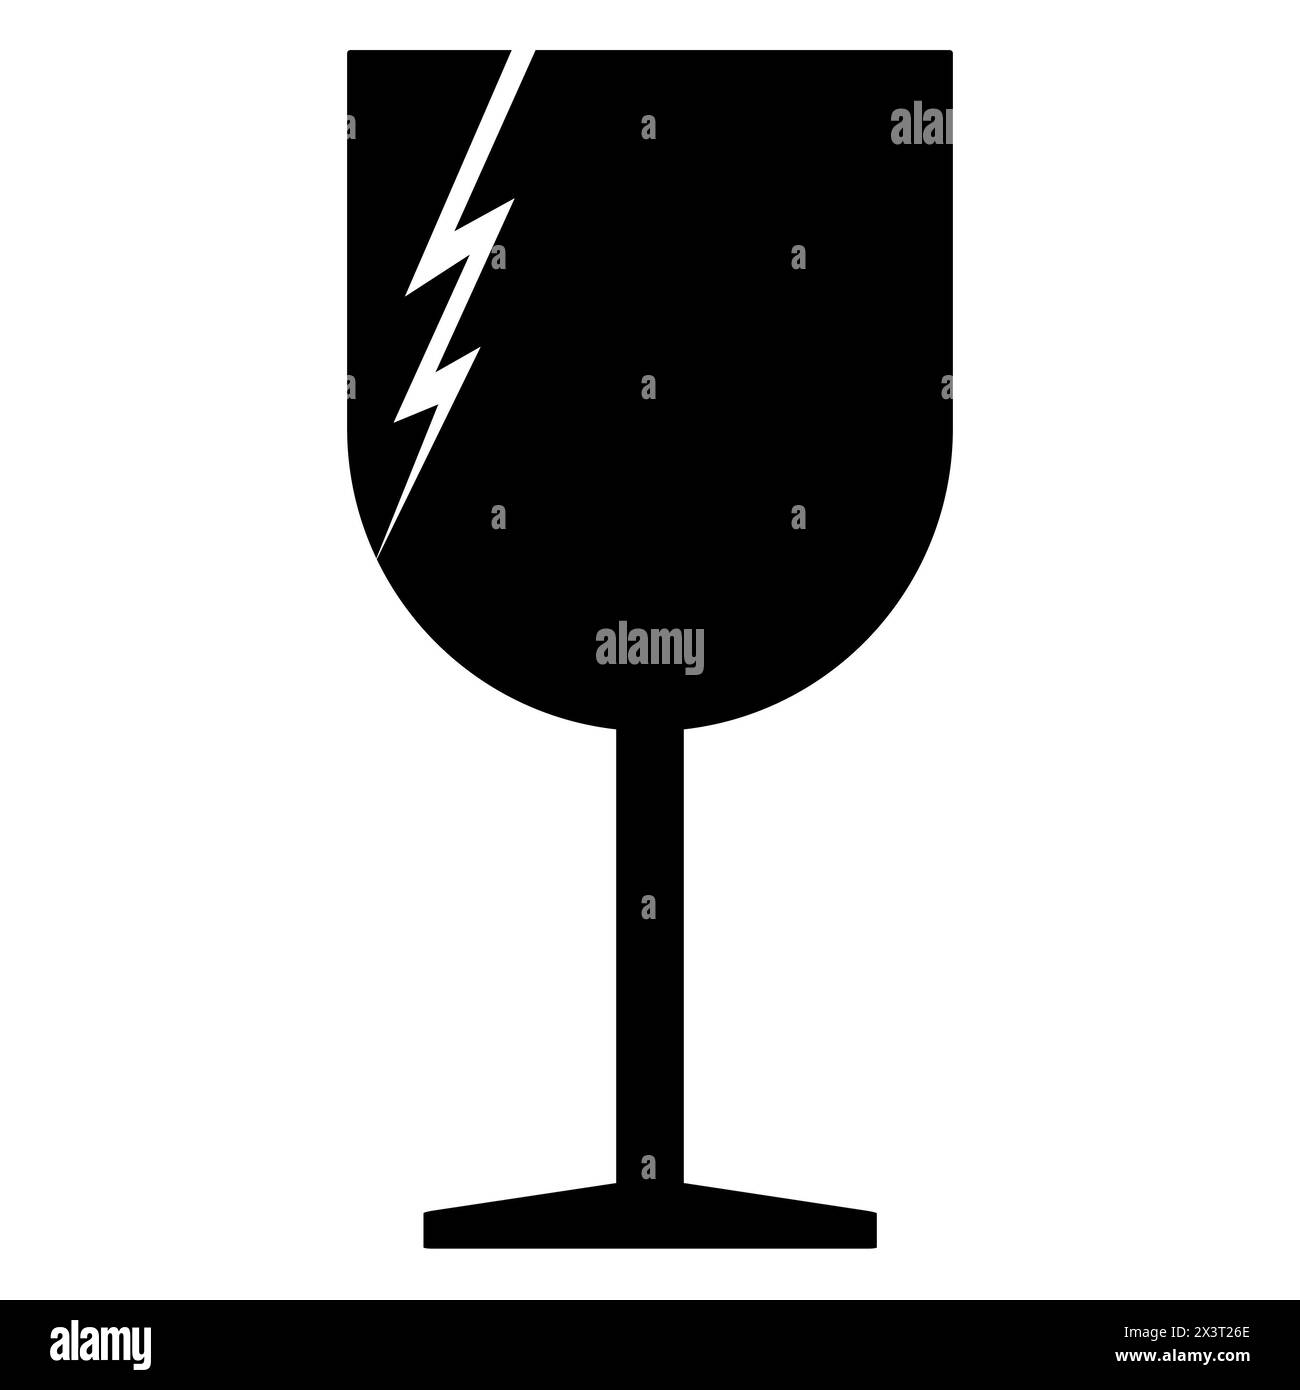 Minimalistic illustration of a black and white isolated broken wine glass silhouette, symbolizing loss and fragility. Fragile thing. Stock Photo